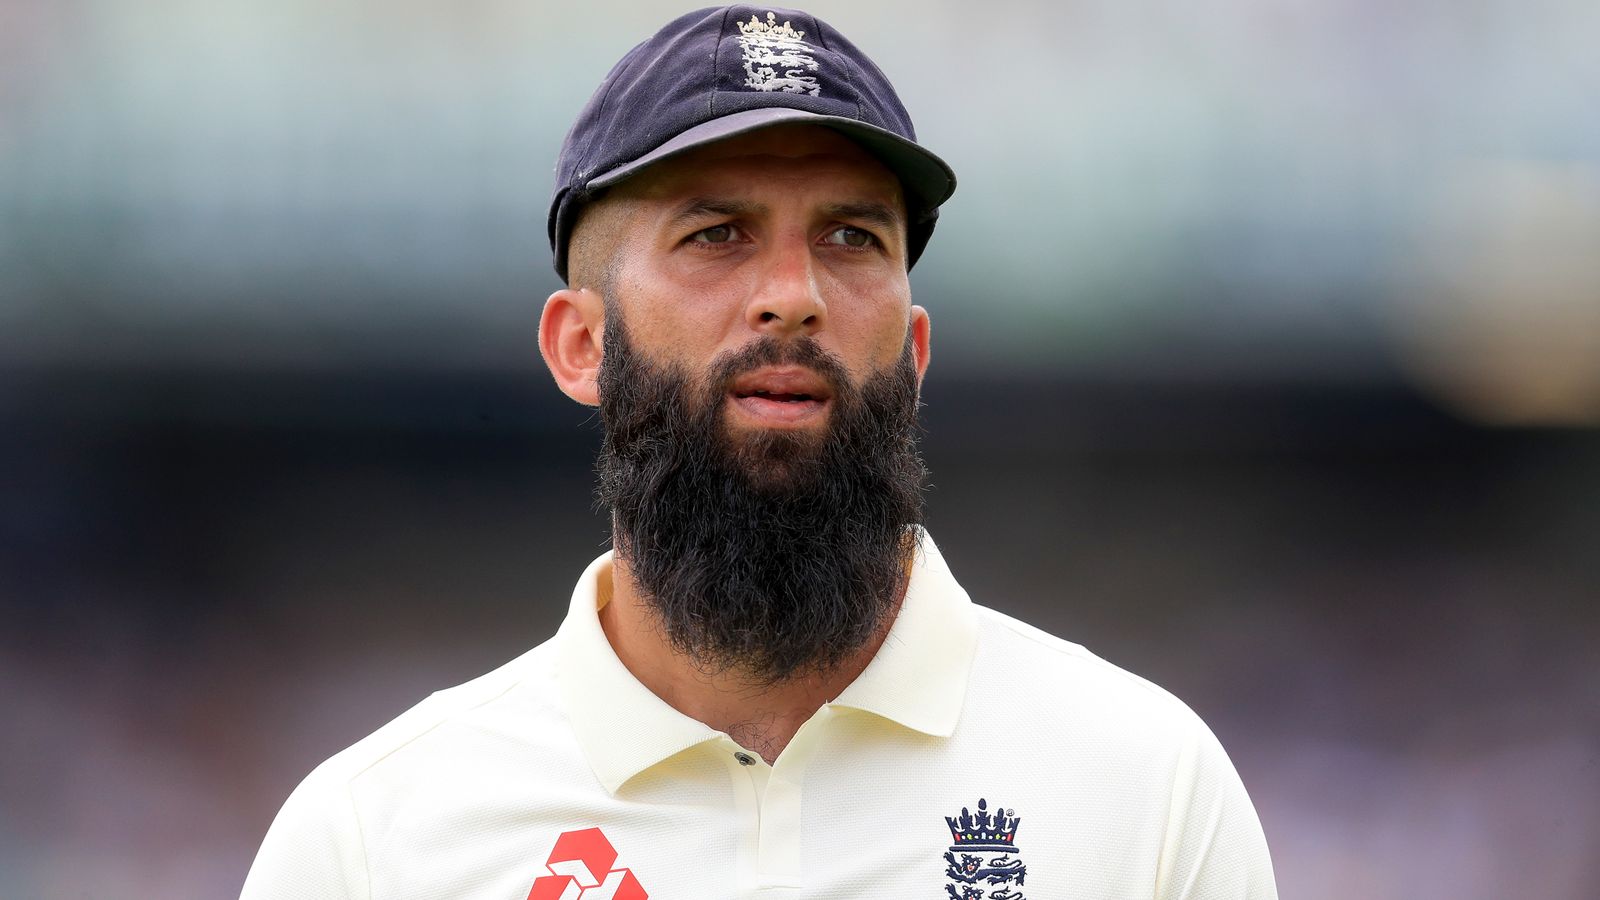 Moeen Ali taking break from all cricket after Lord's omission | Cricket News | Sky Sports